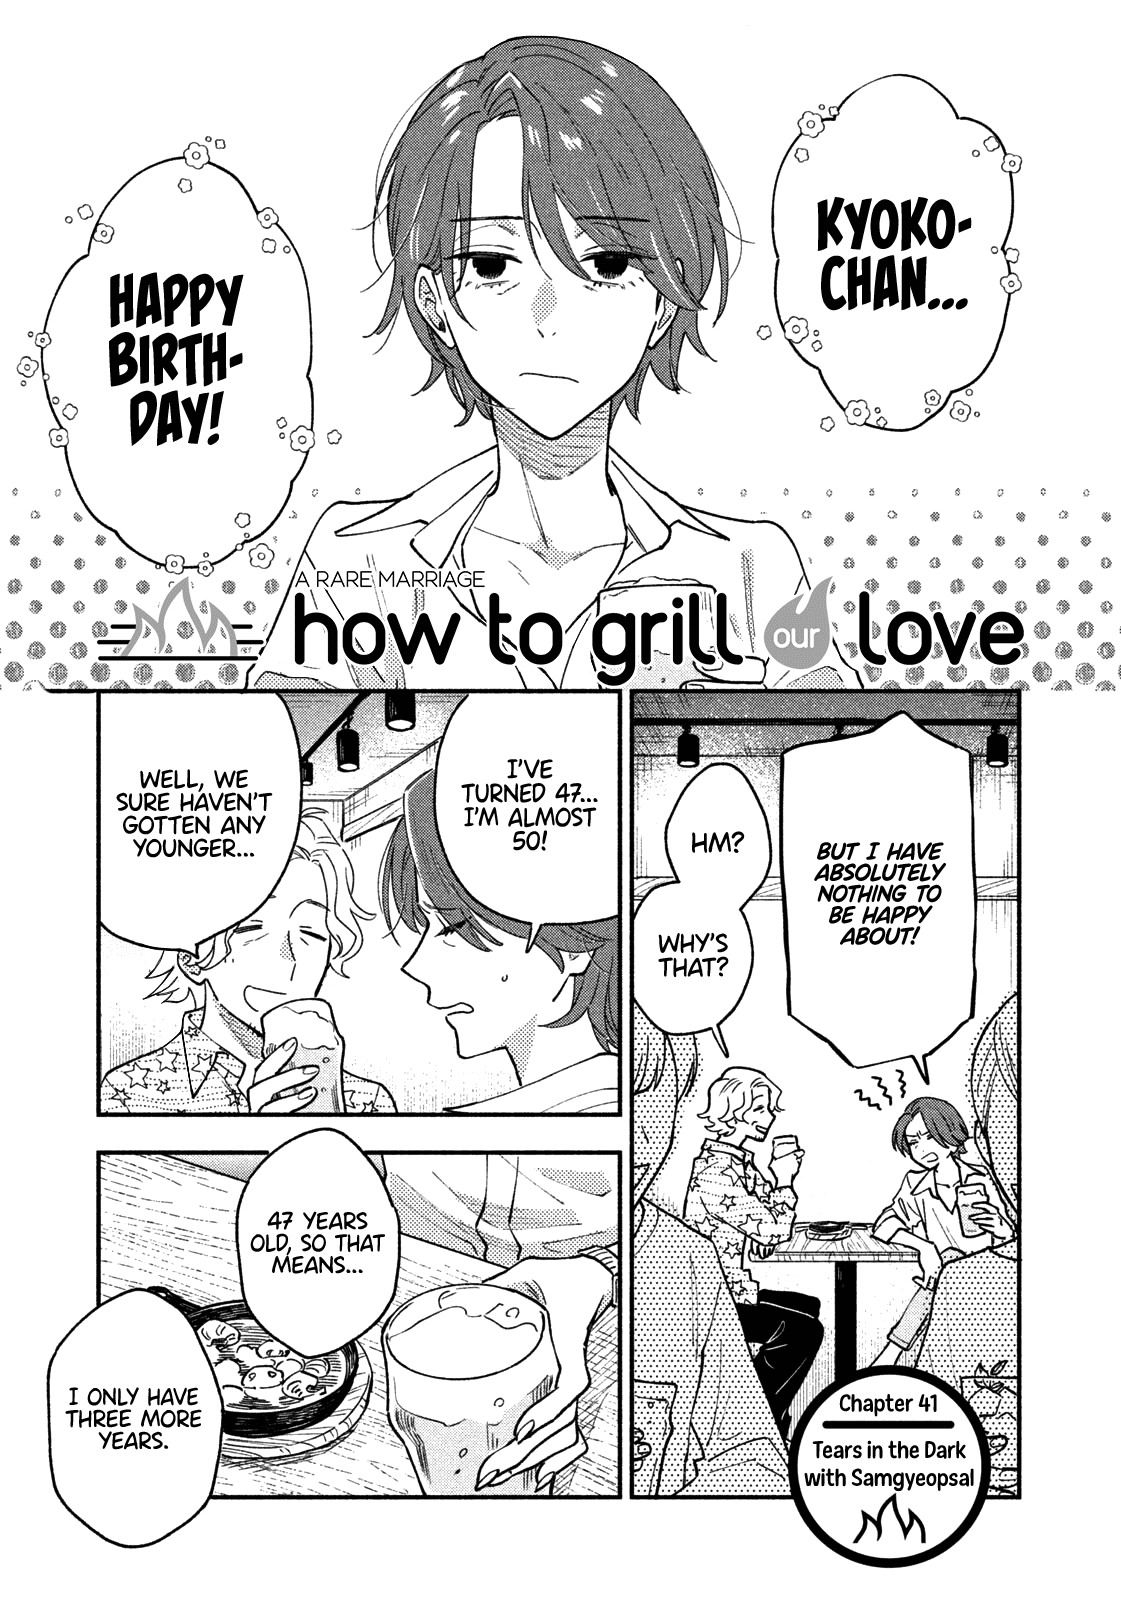 A Rare Marriage: How To Grill Our Love Chapter 41 #2